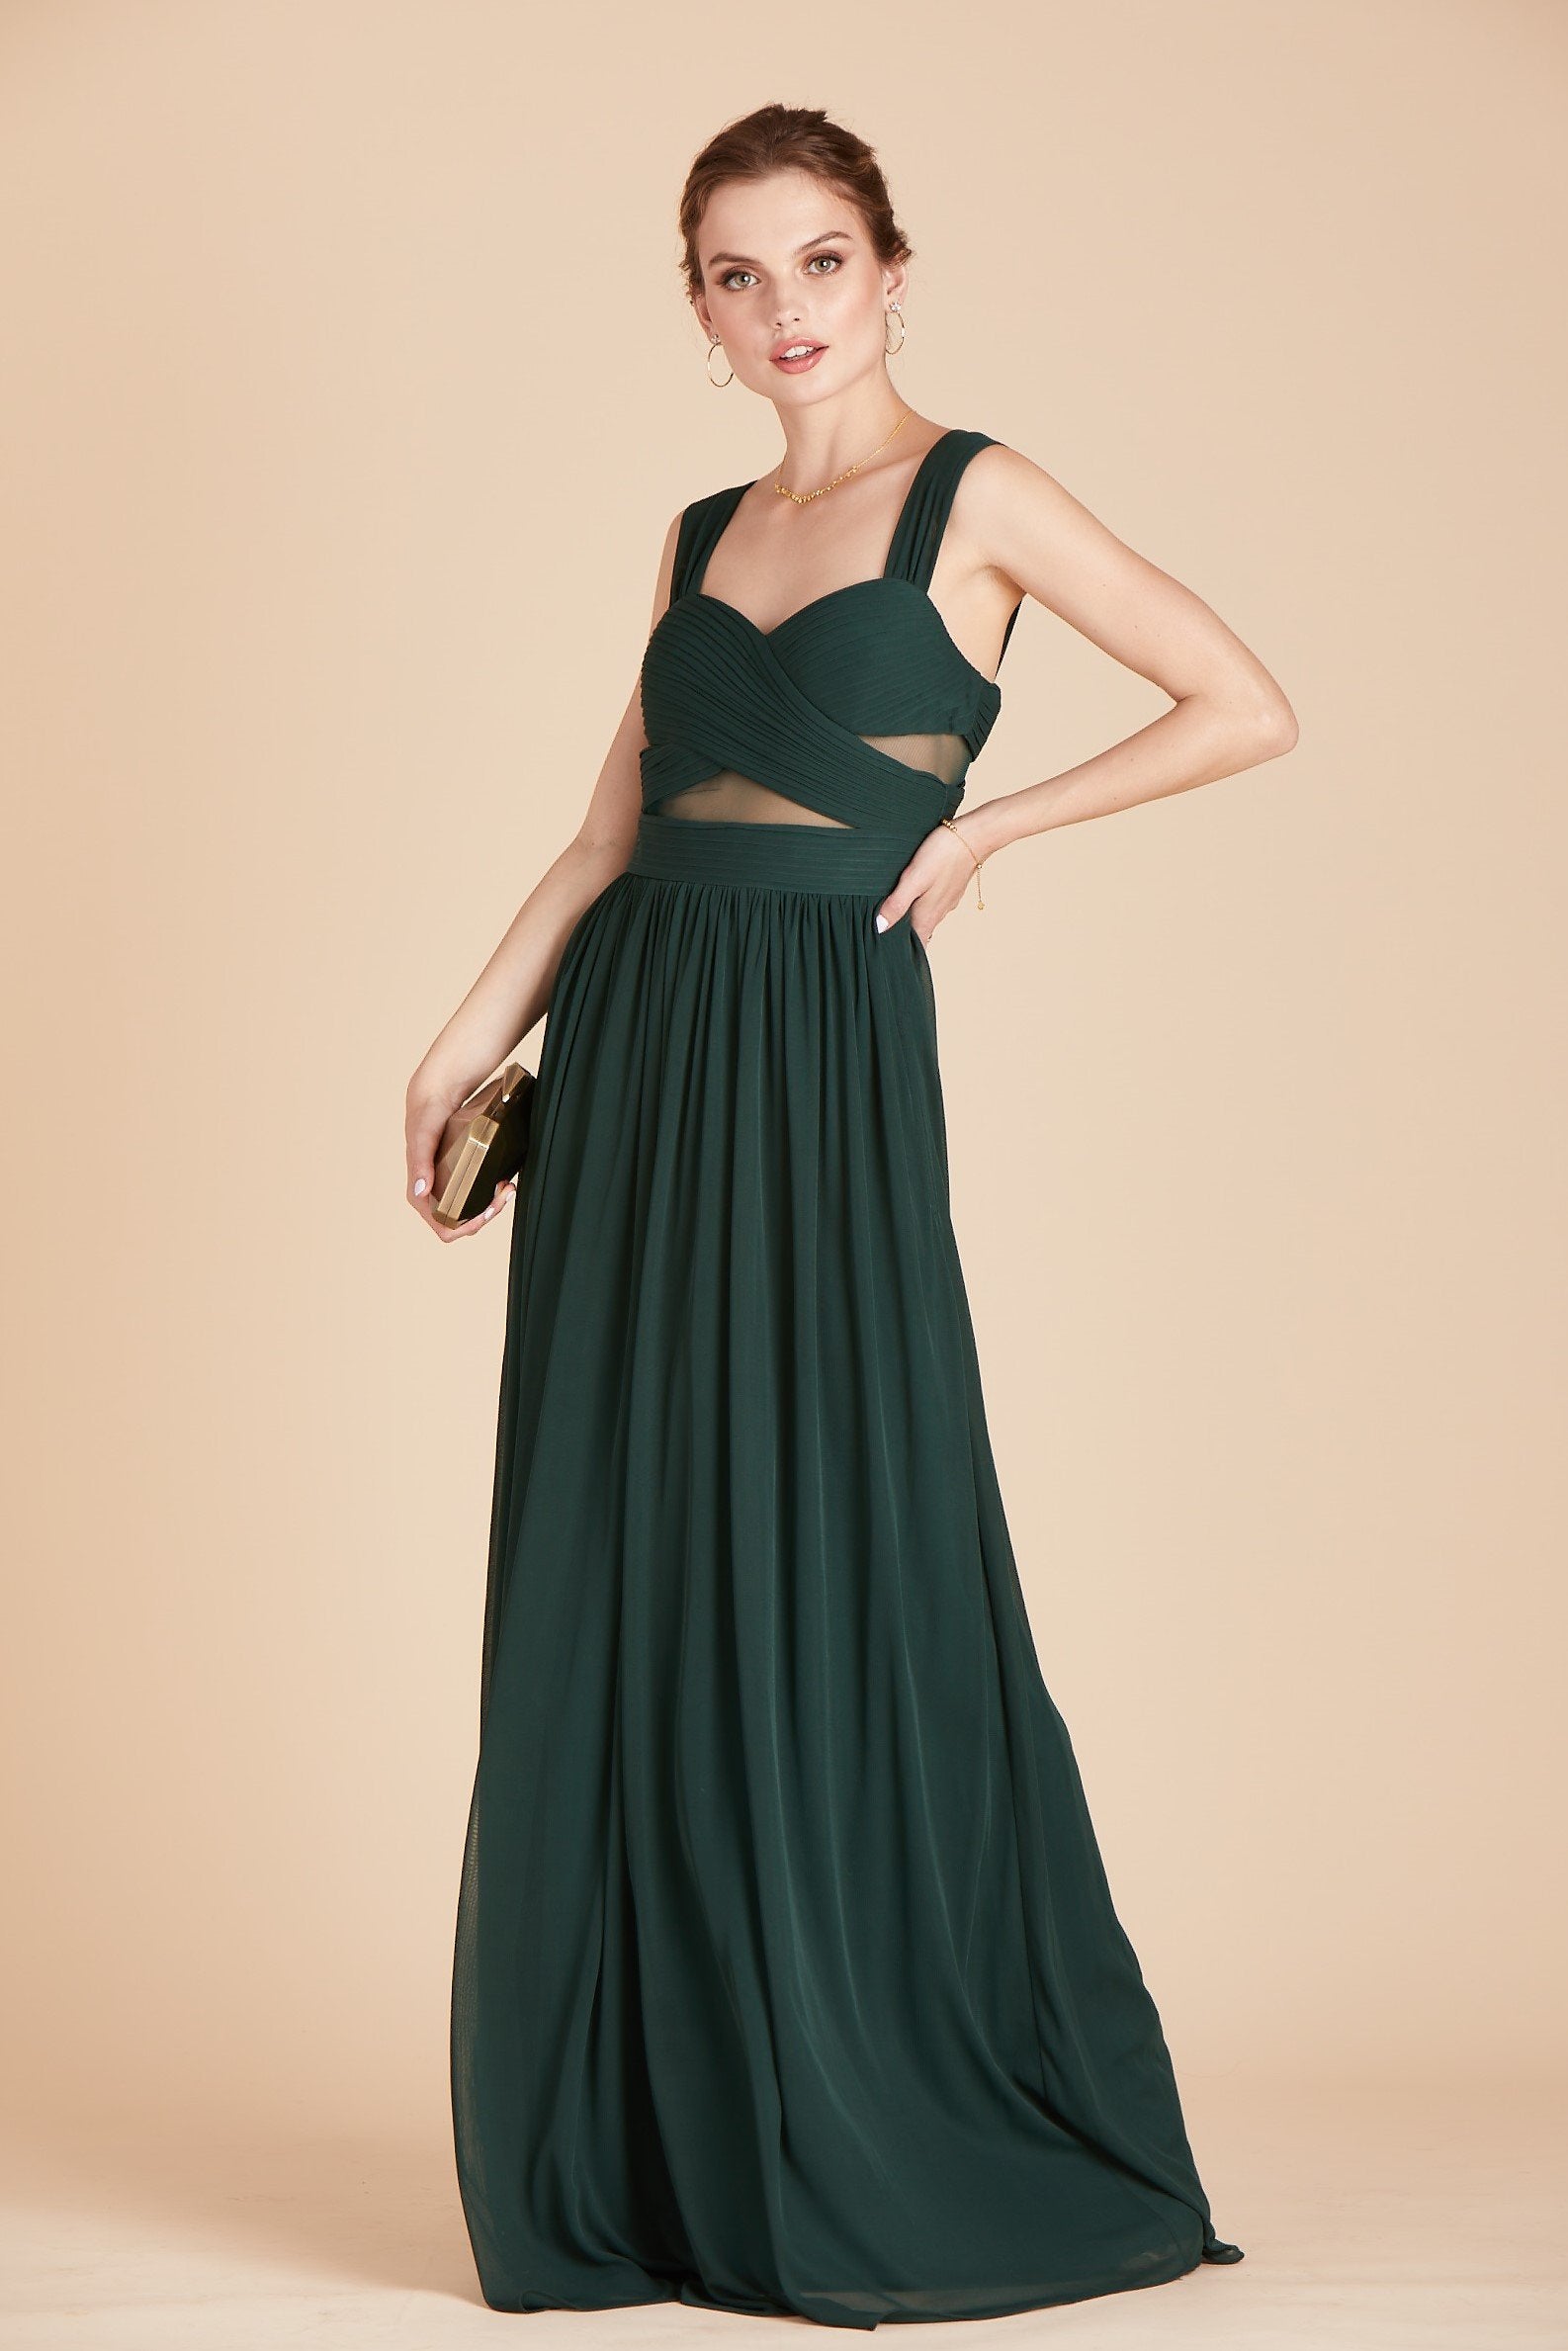 Elsye bridesmaid dress in emerald green chiffon by Birdy Grey, front view